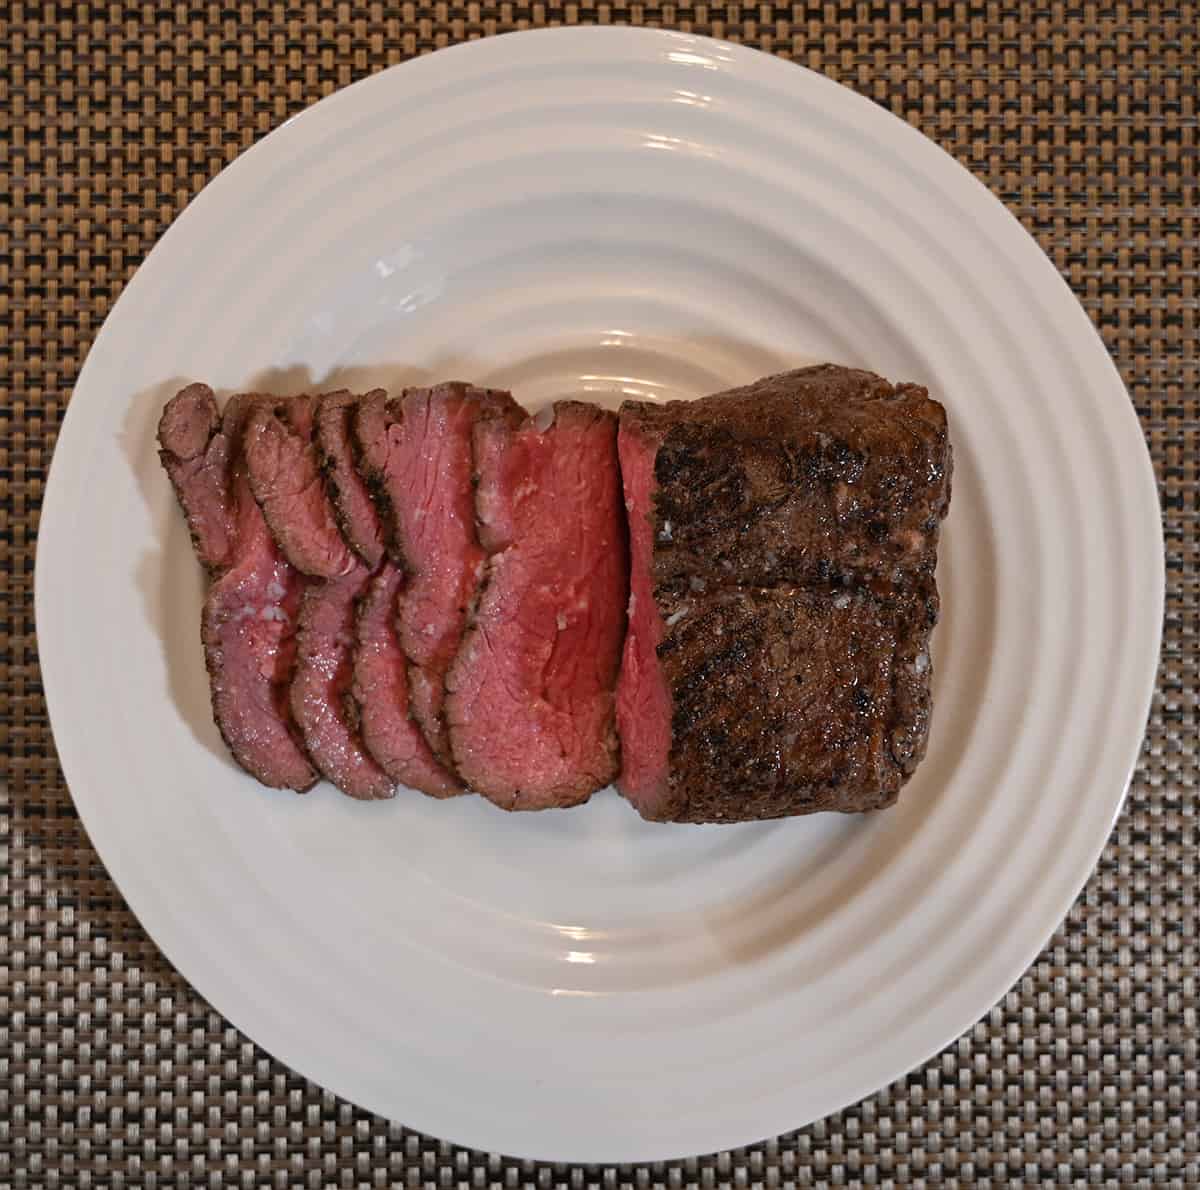 Image of a plate of sliced sirloin served cold right from the package. The sirloin appears rare. 